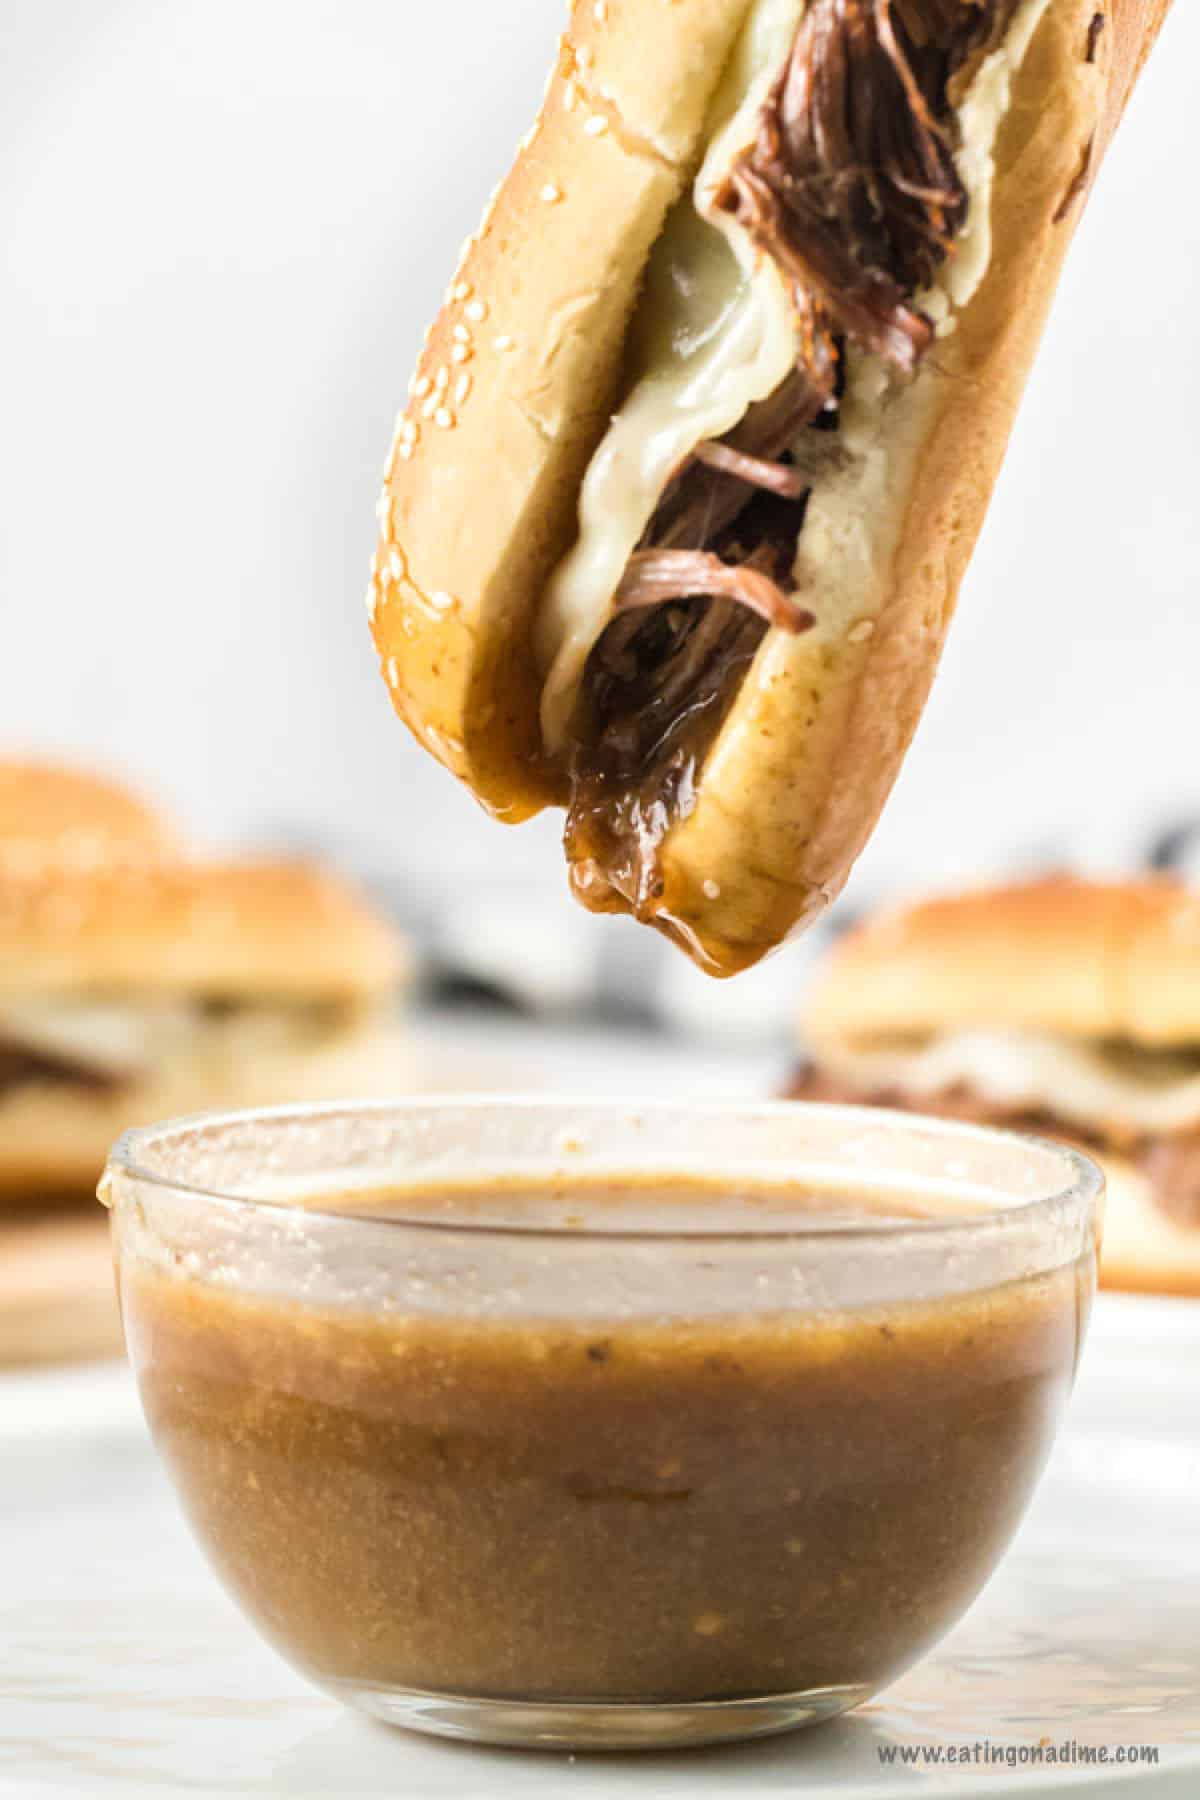 Dipping the french dip sandwiches in the gravy